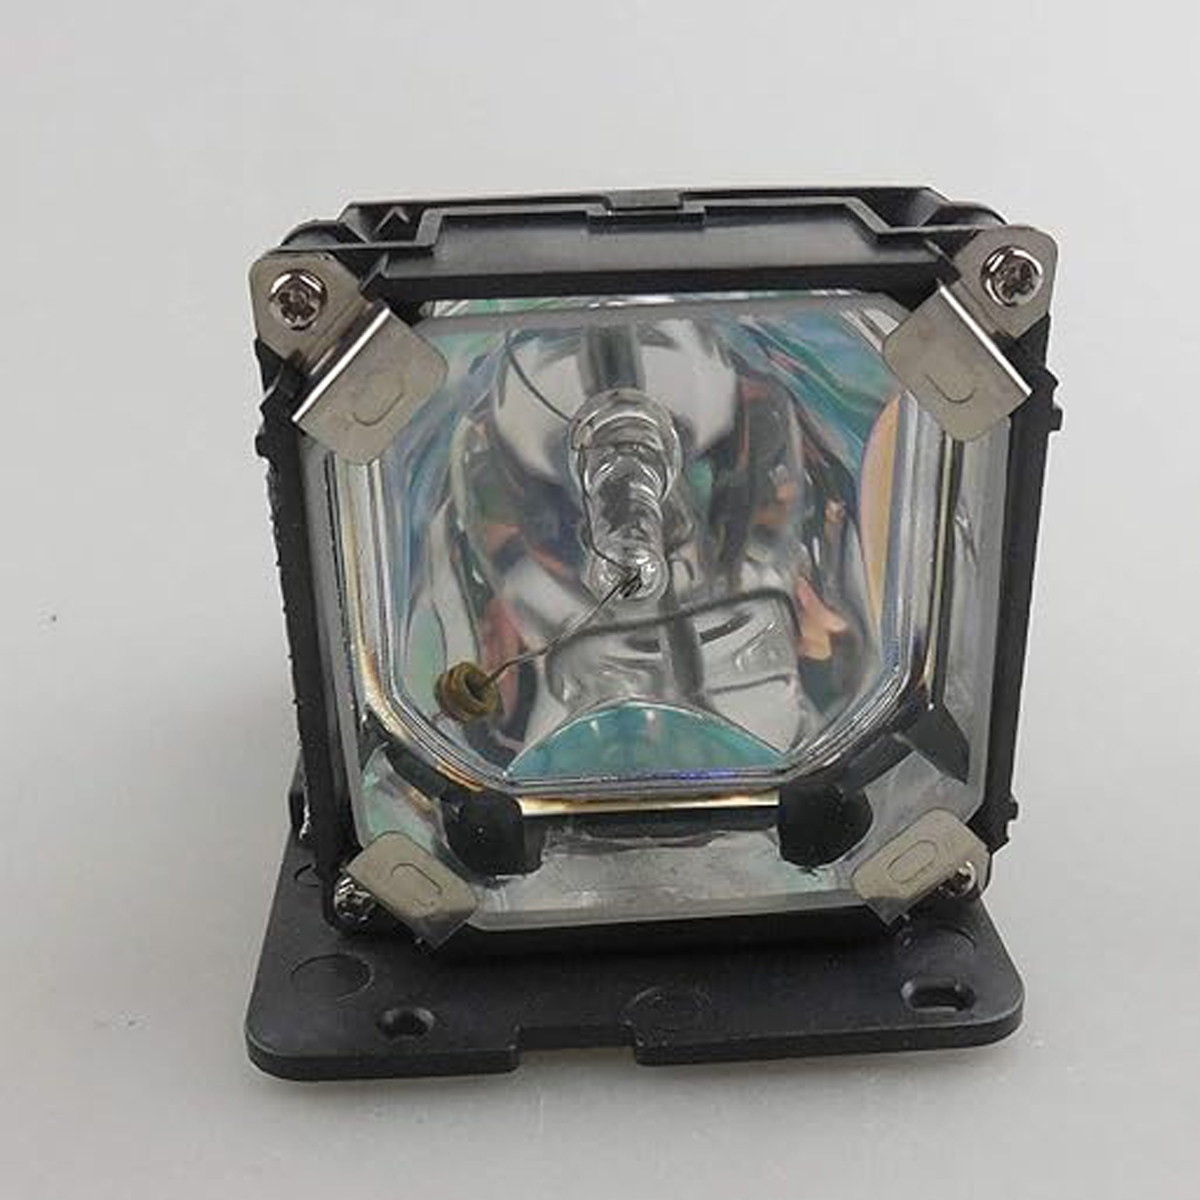 Replacement Projector lamp LT55LP/50020064 For Nec Projector